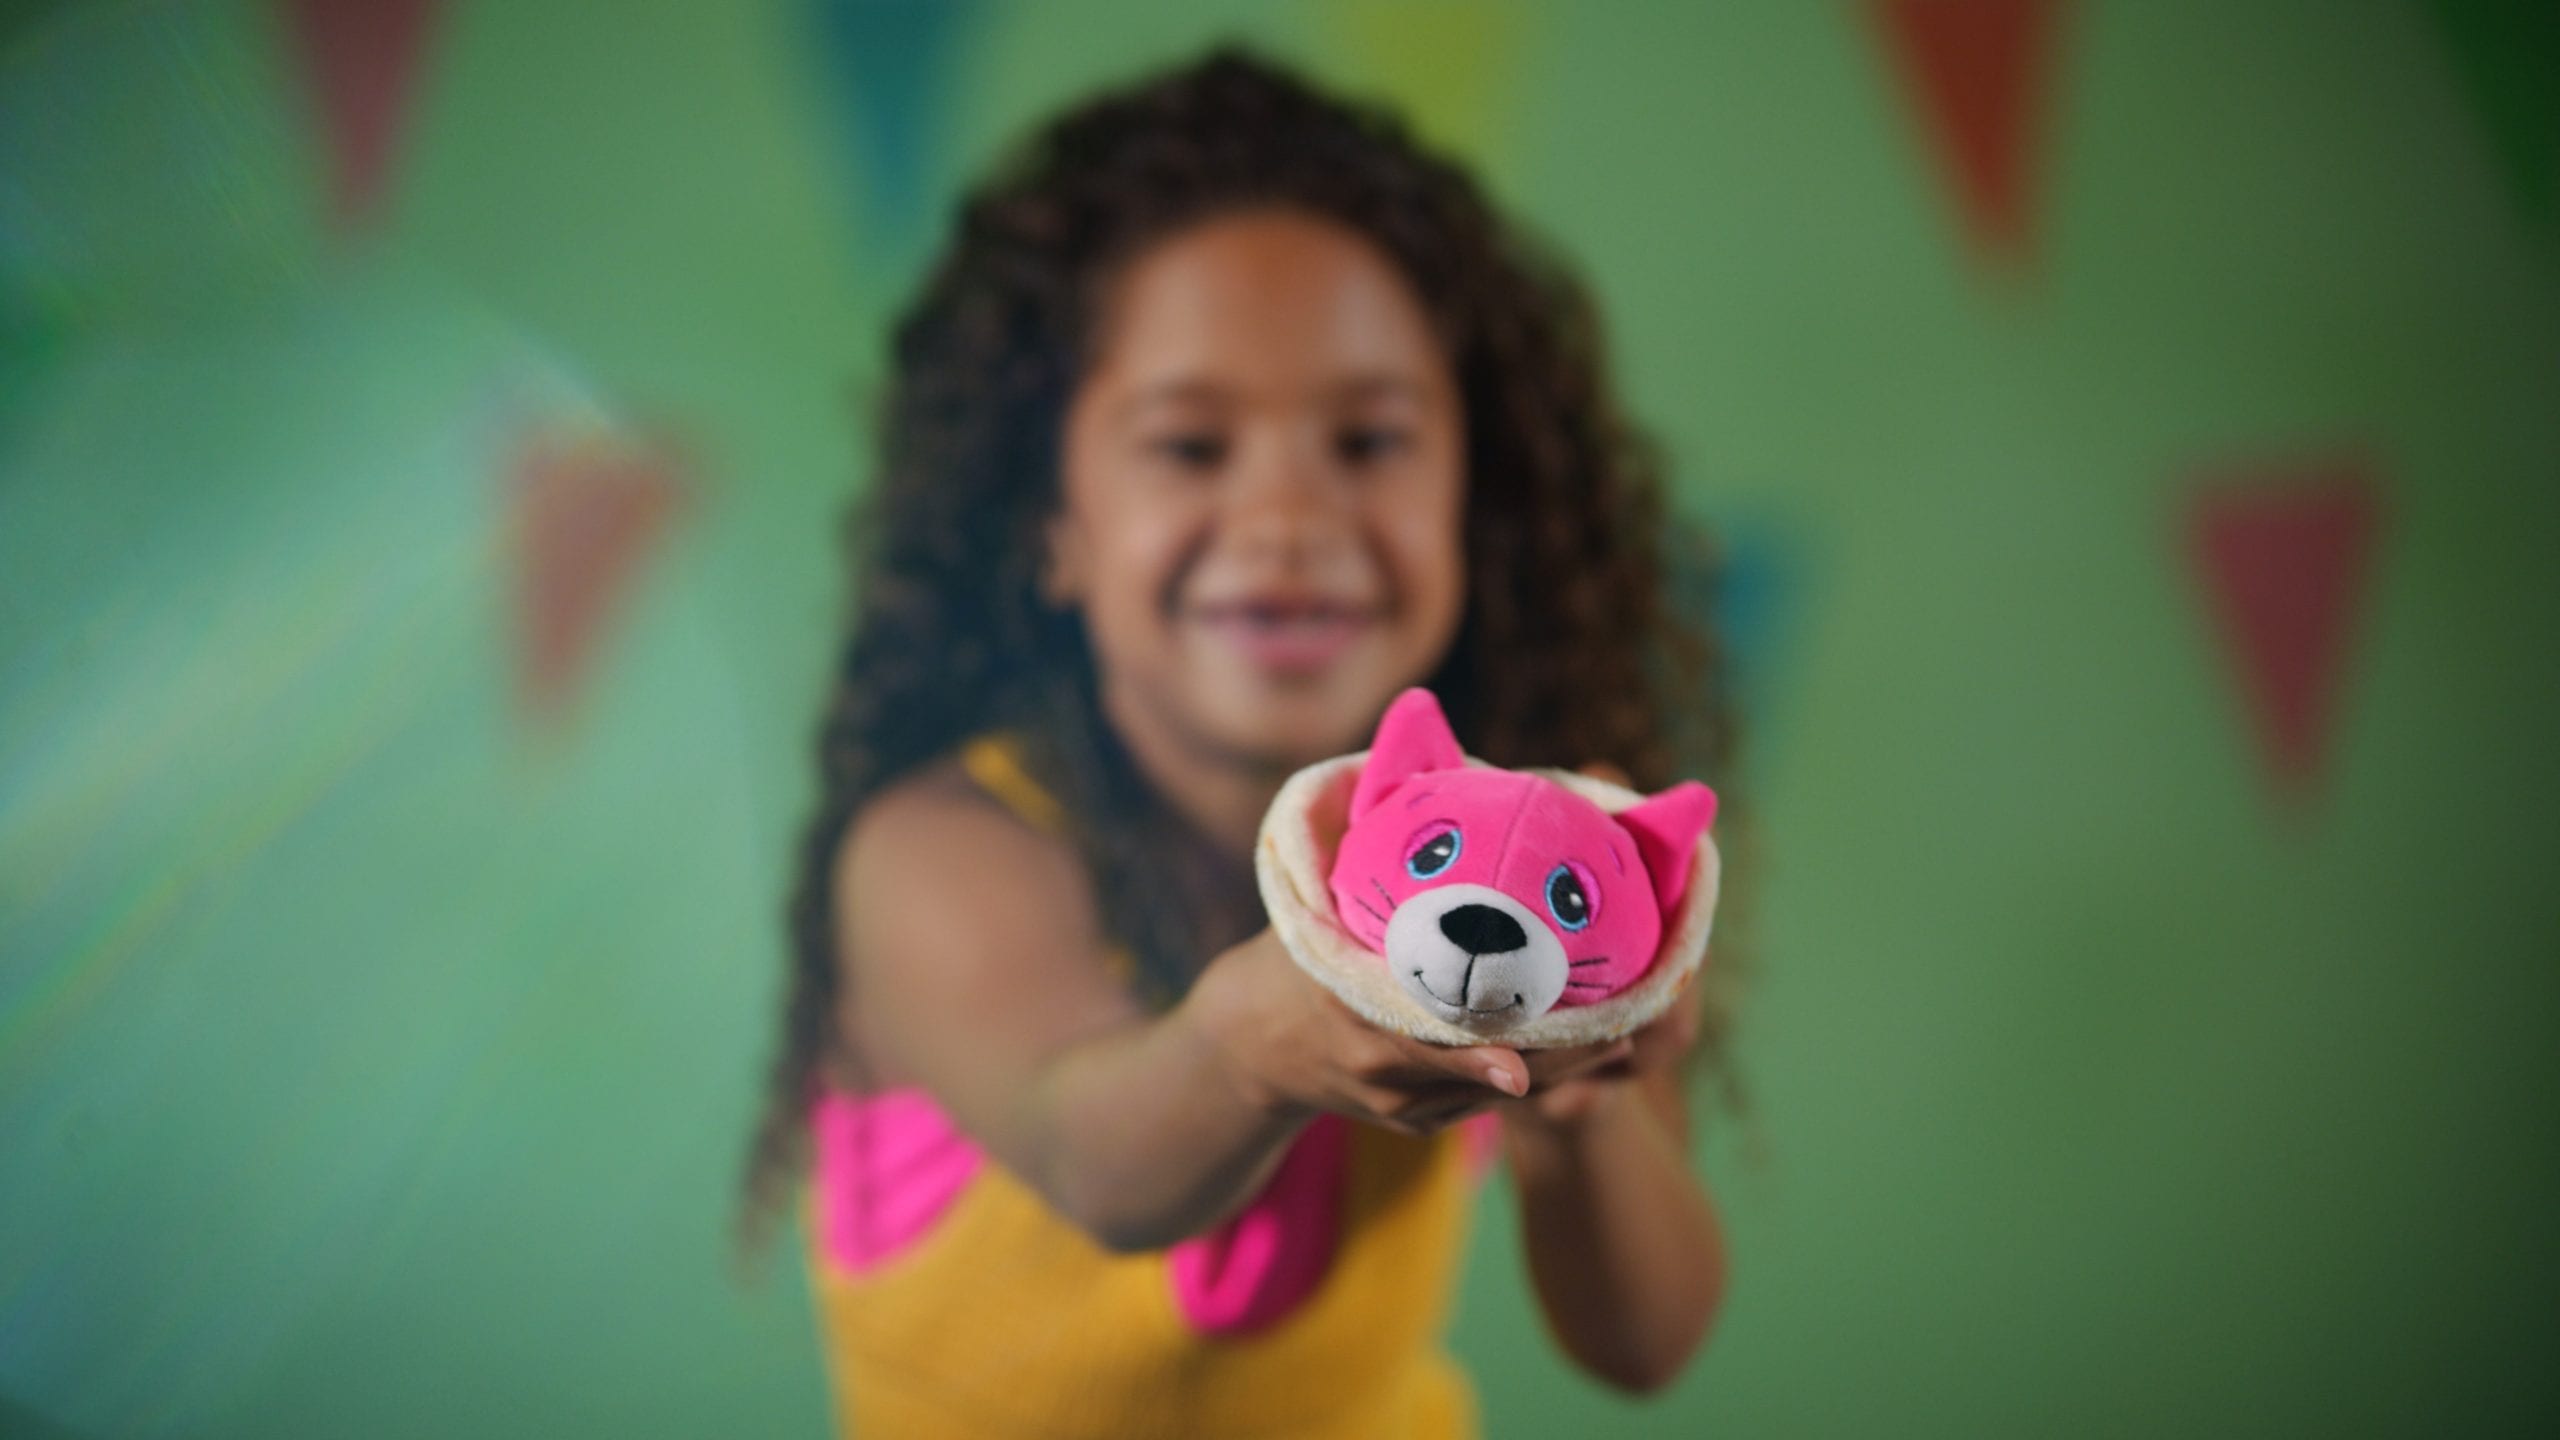 Closeup of stuffed animal being held by a smiling girl